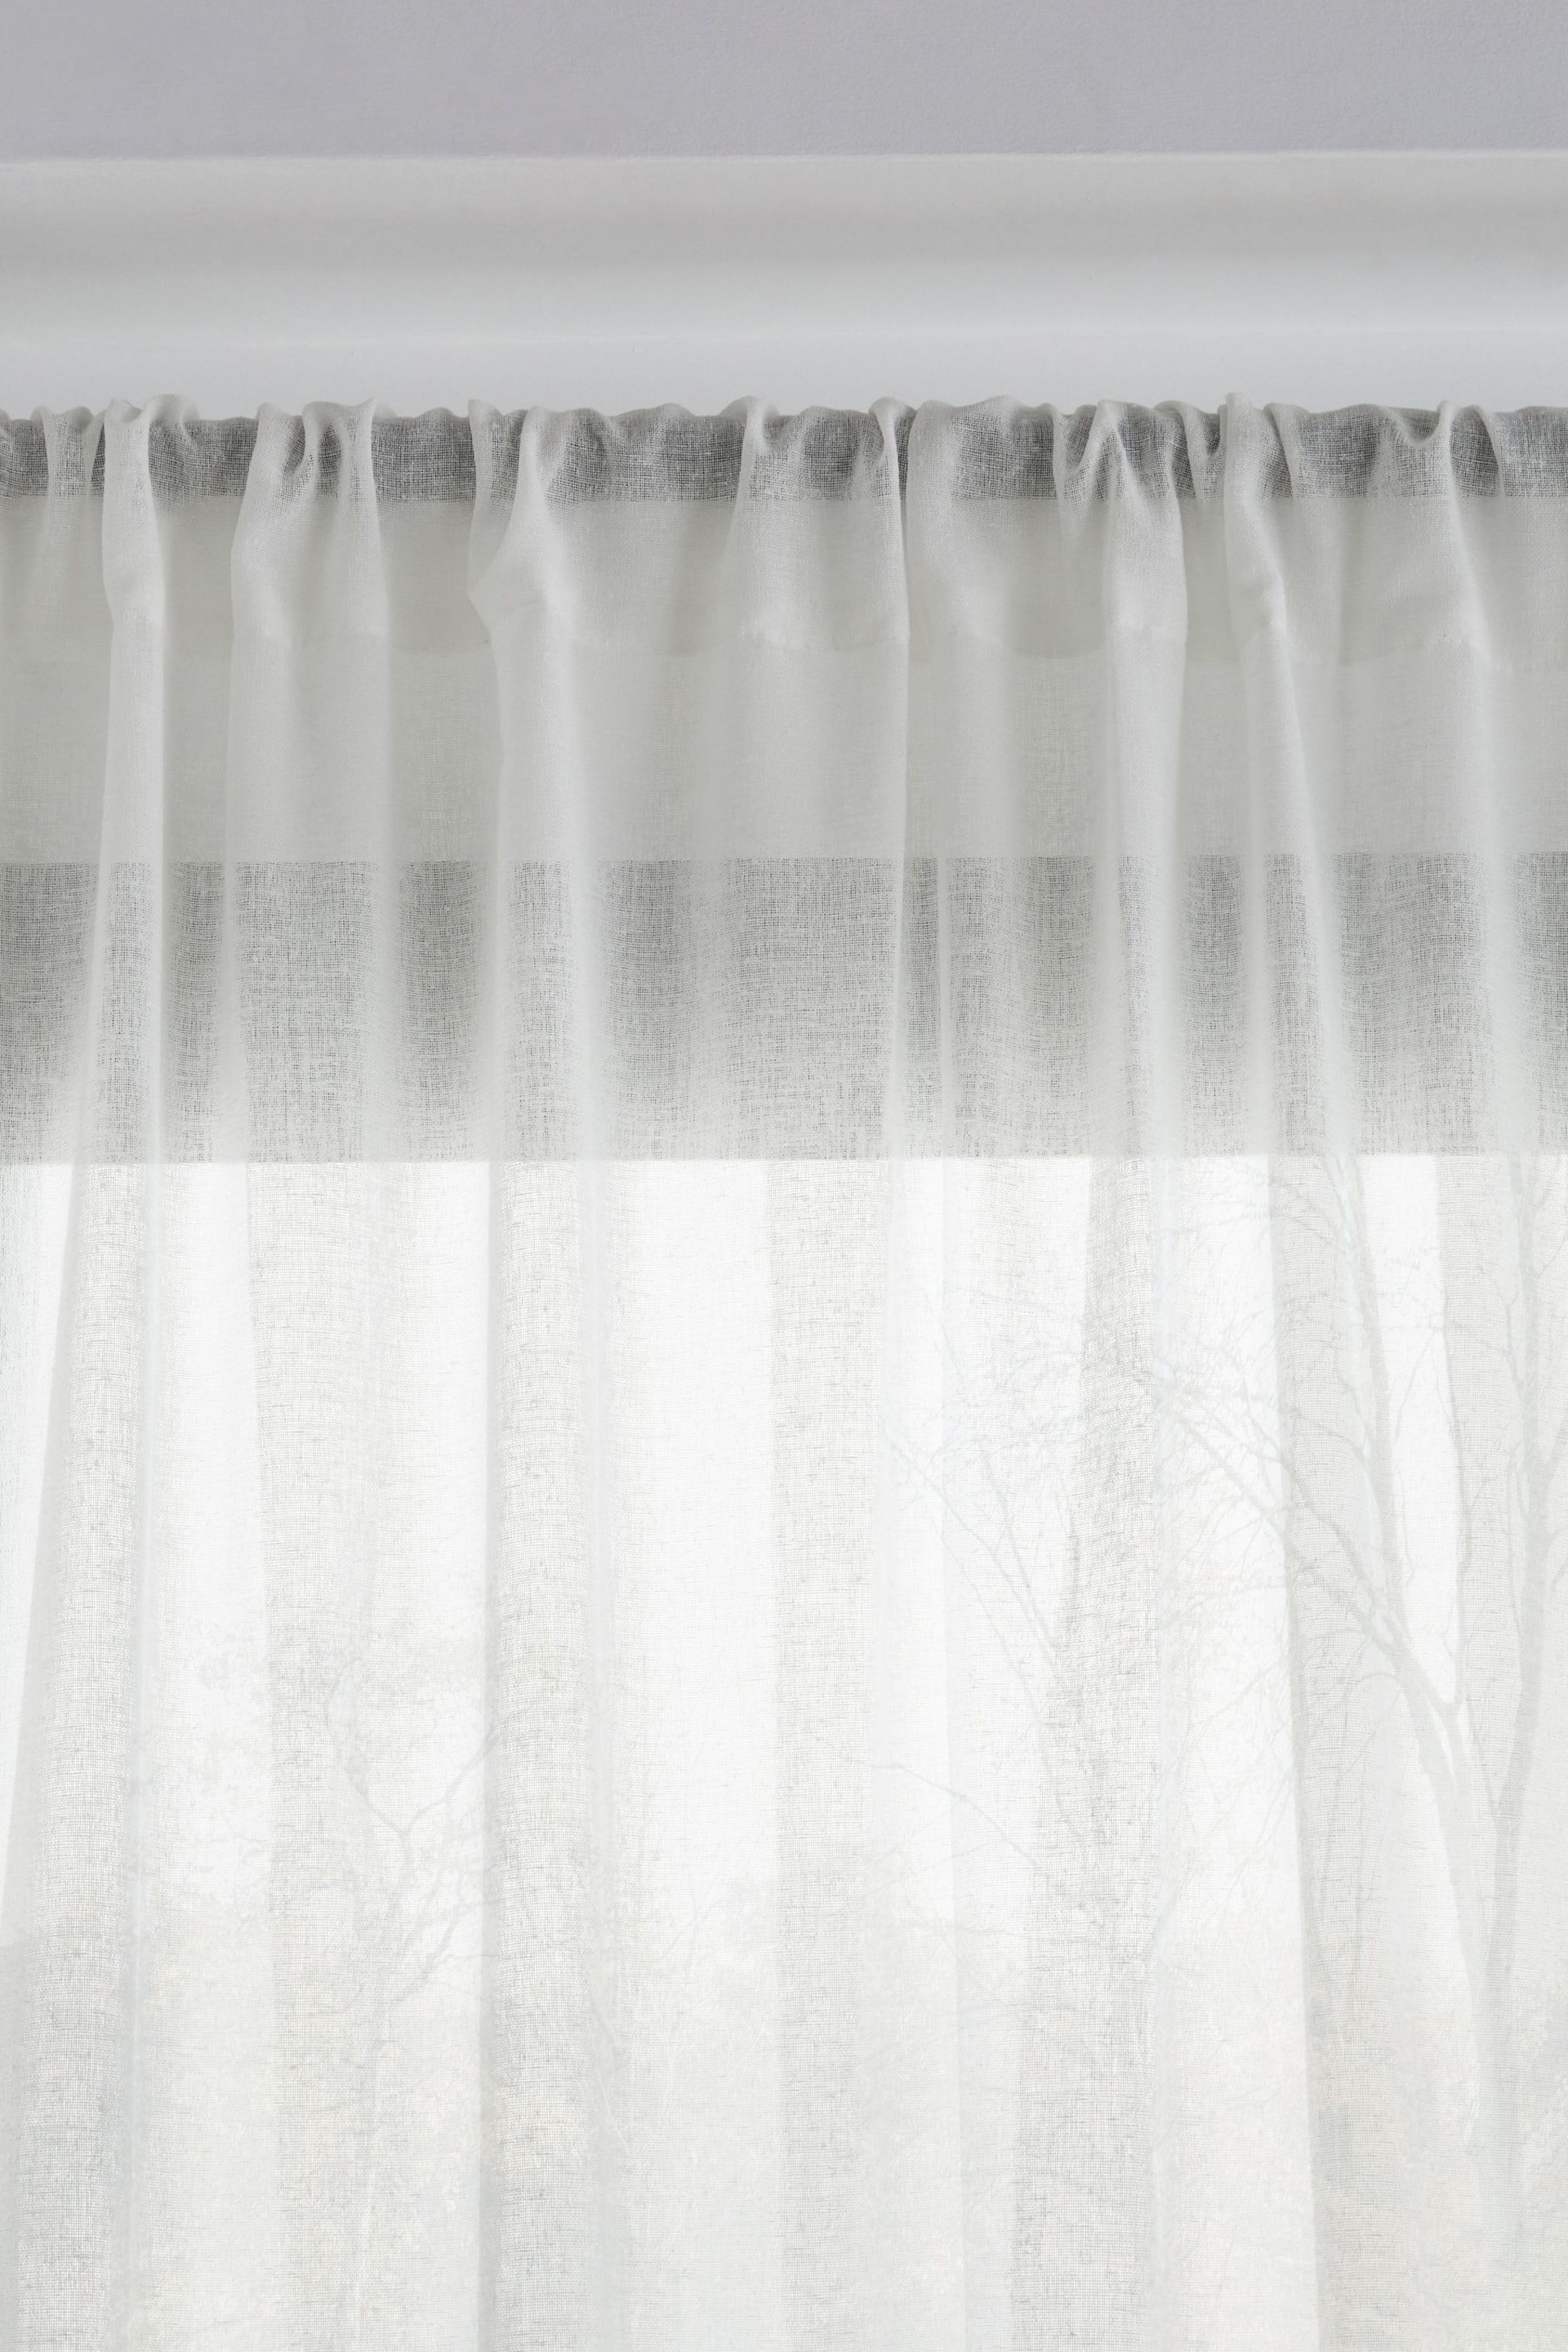 White Linen Look Slot Top Voile Unlined Sheer Panel Curtain - Image 3 of 3